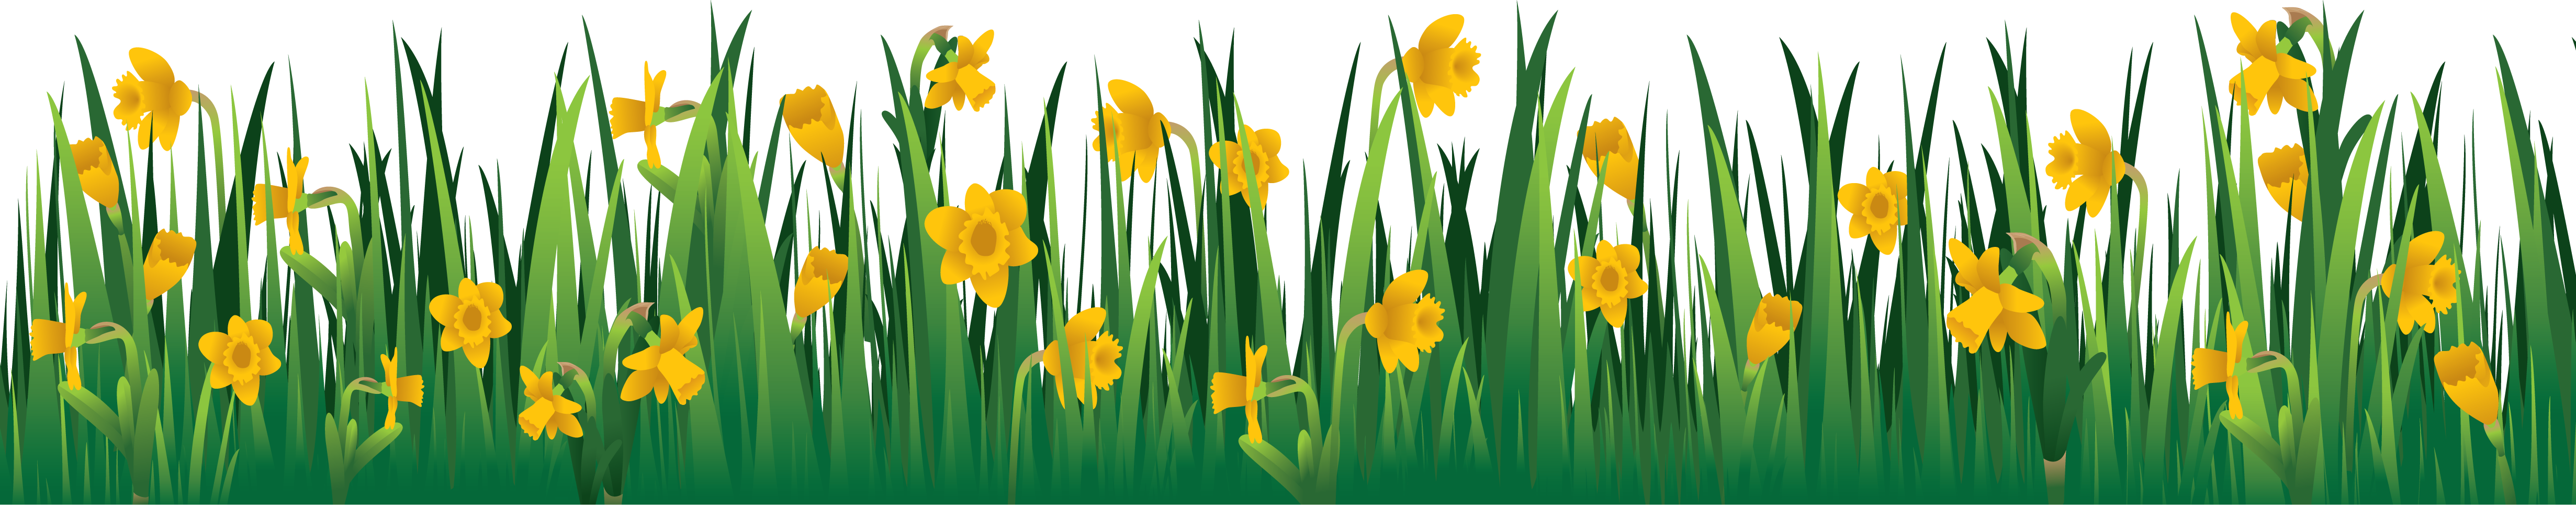 Grass PNG Images HD